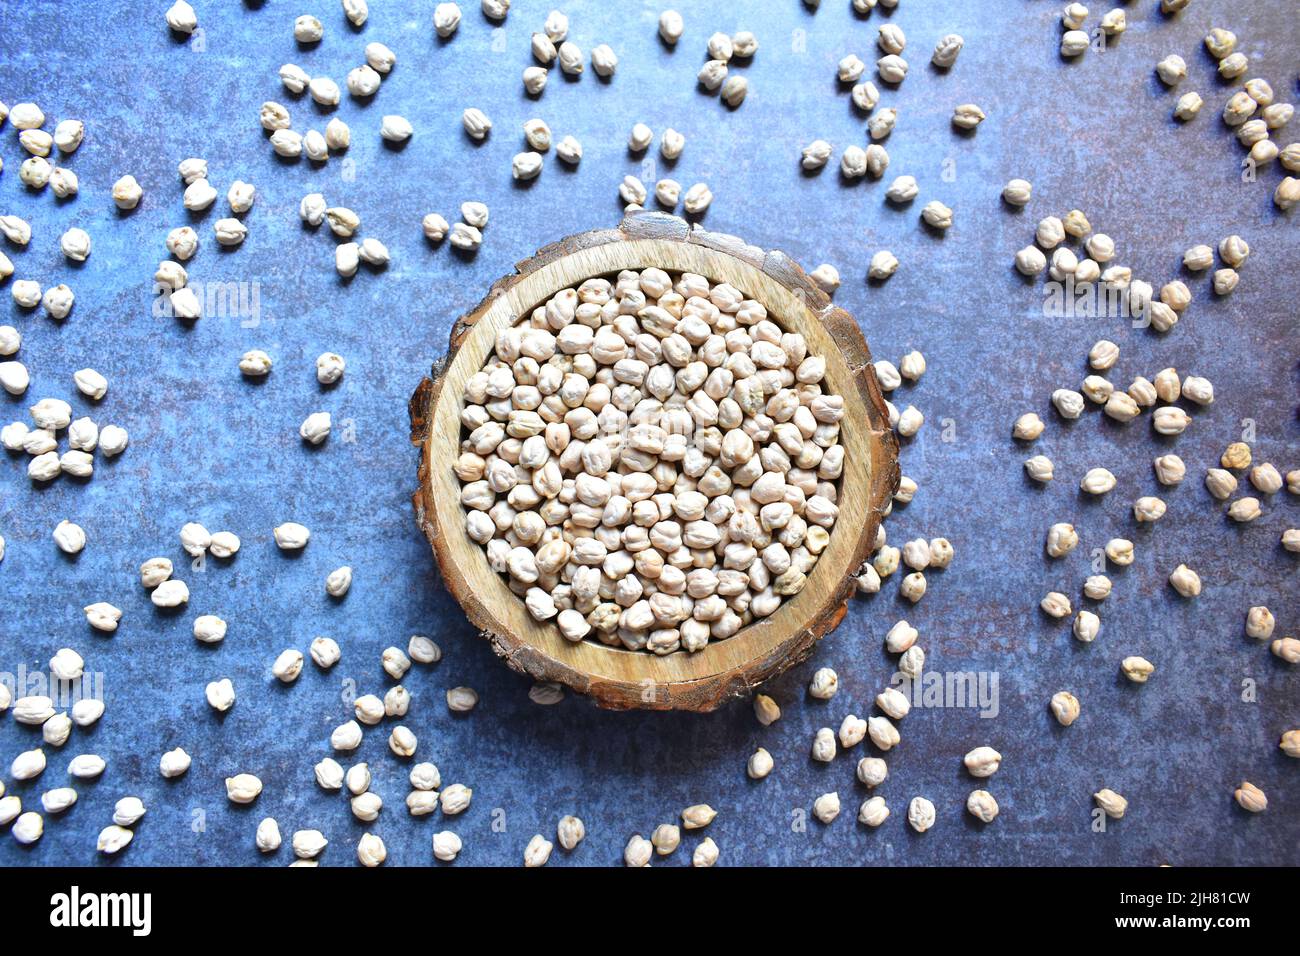 Raw whole dried white Chickpeas Stock Photo